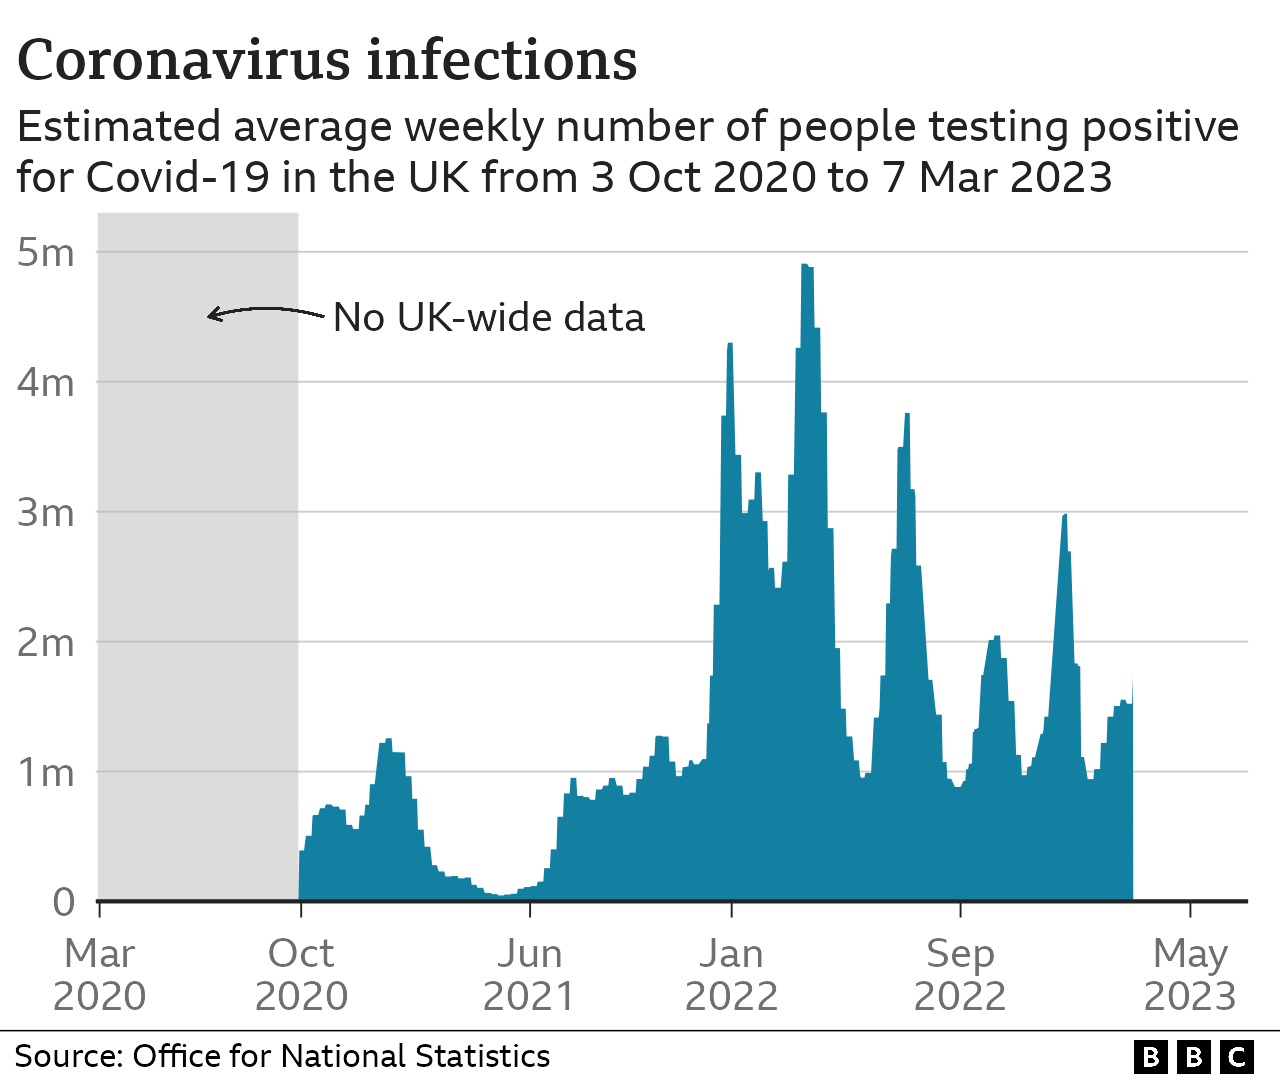 Chart showing estimated coronavirus cases in the UK between October 2020 and March 2023. There is an initial rise in about December 2020 to about 1 million infections, before a sustained period of spikes and falls back to 1 million cases. the peak is nearly 5 million cases in February 2022